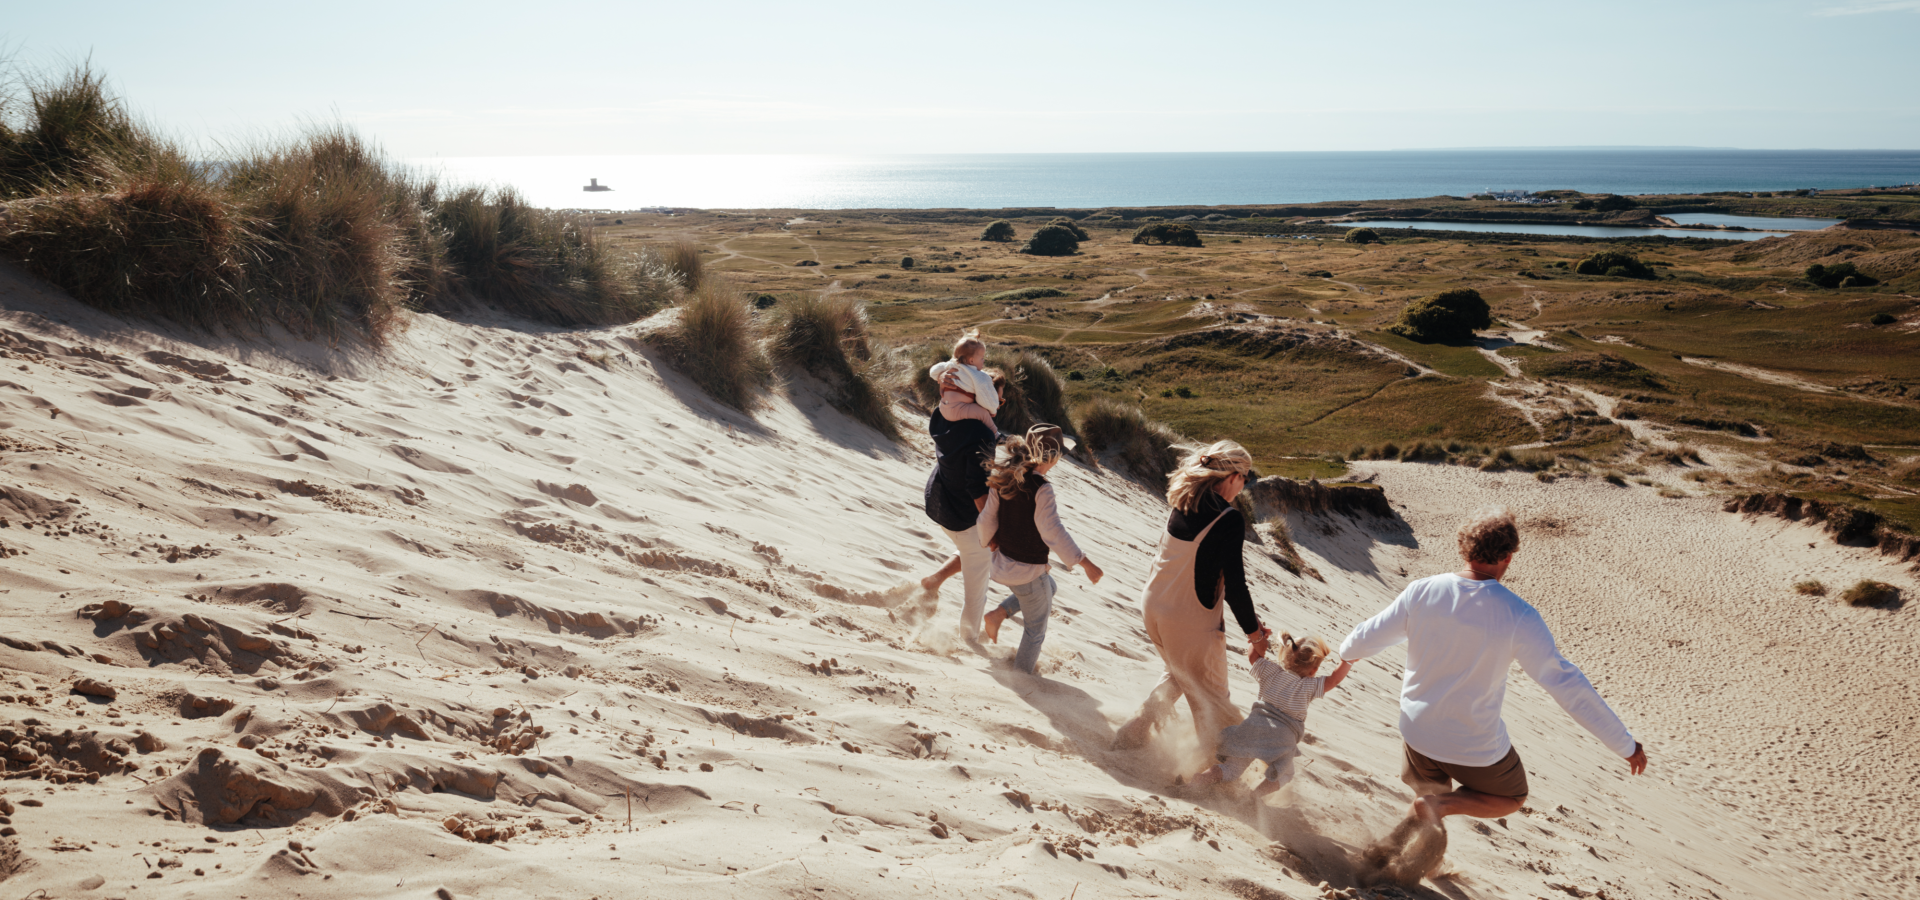 Family running on sand dunes in the sunshine with sea in the background